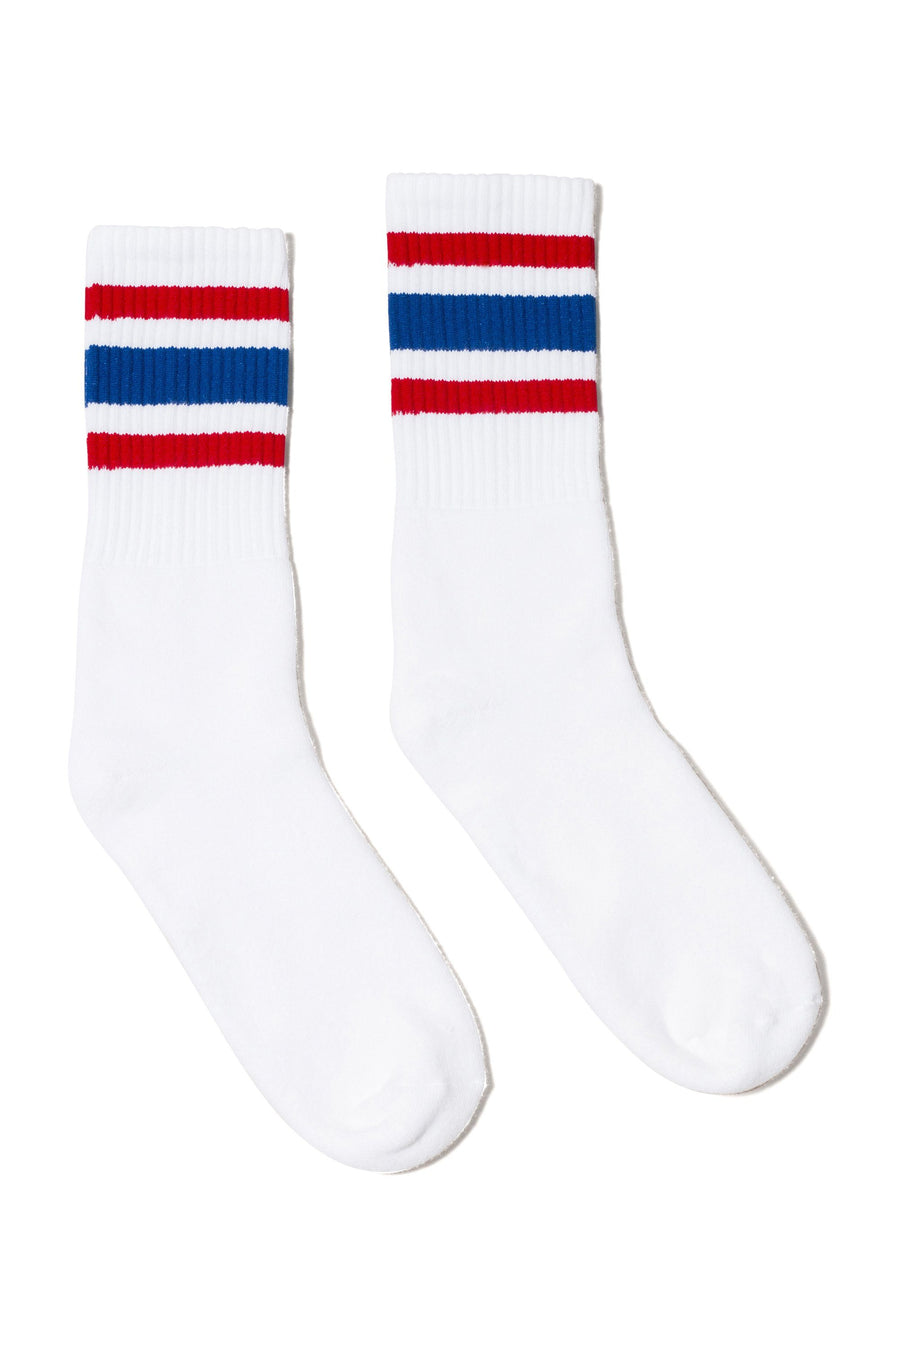 White Crew Sock with a Red Stripe, Blue Stripe, Red Stripe Pattern on the leg.